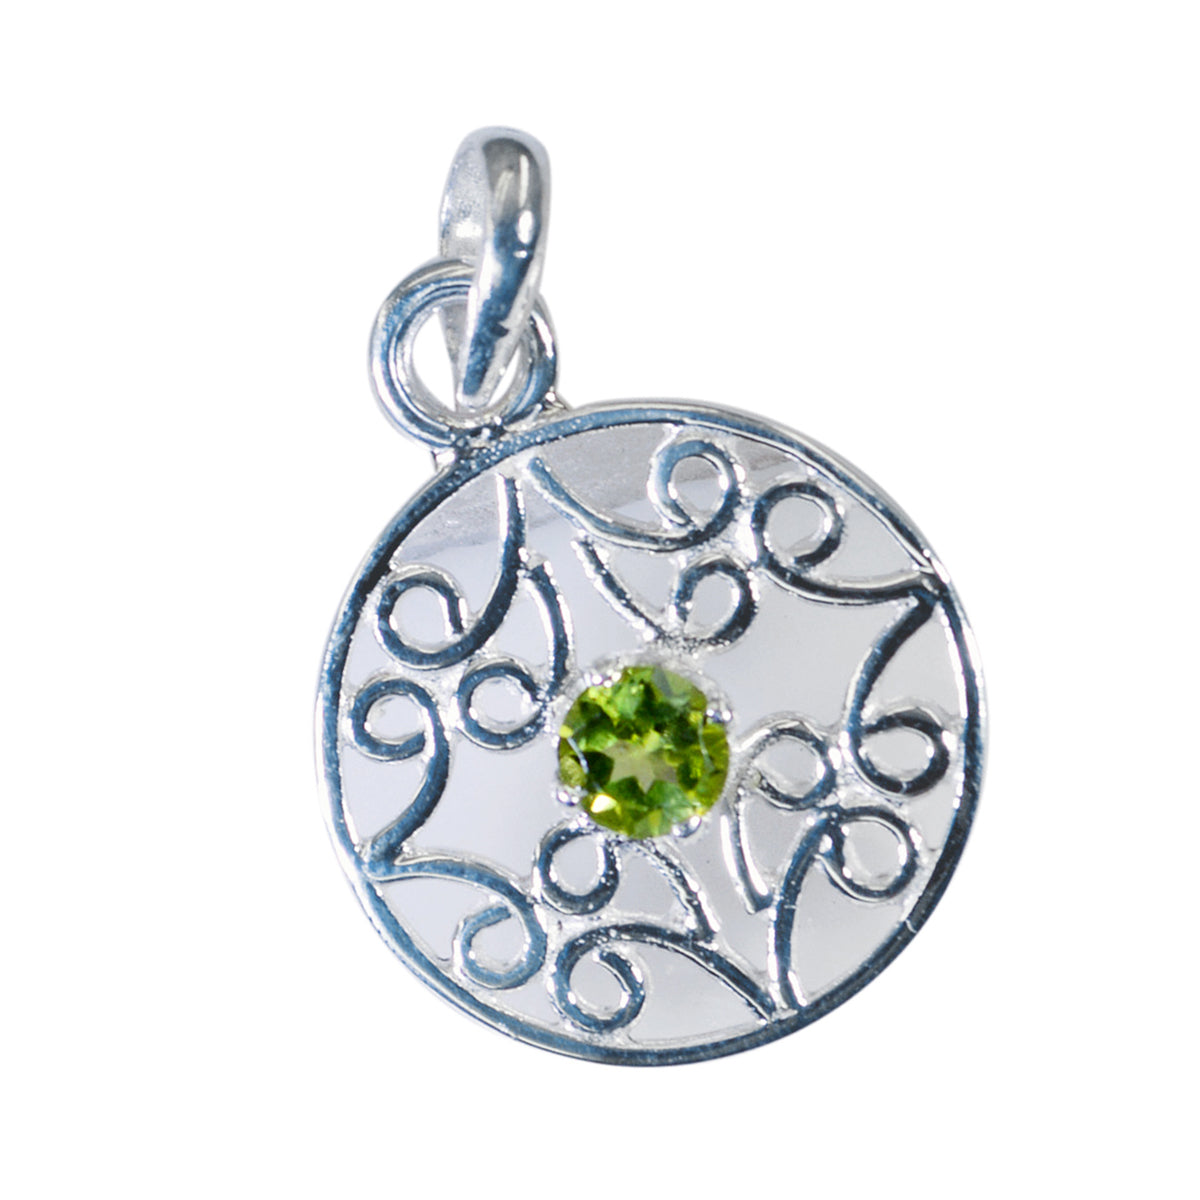 Riyo Spunky Gems Round Faceted Green Peridot Silver Pendant Gift For Wife